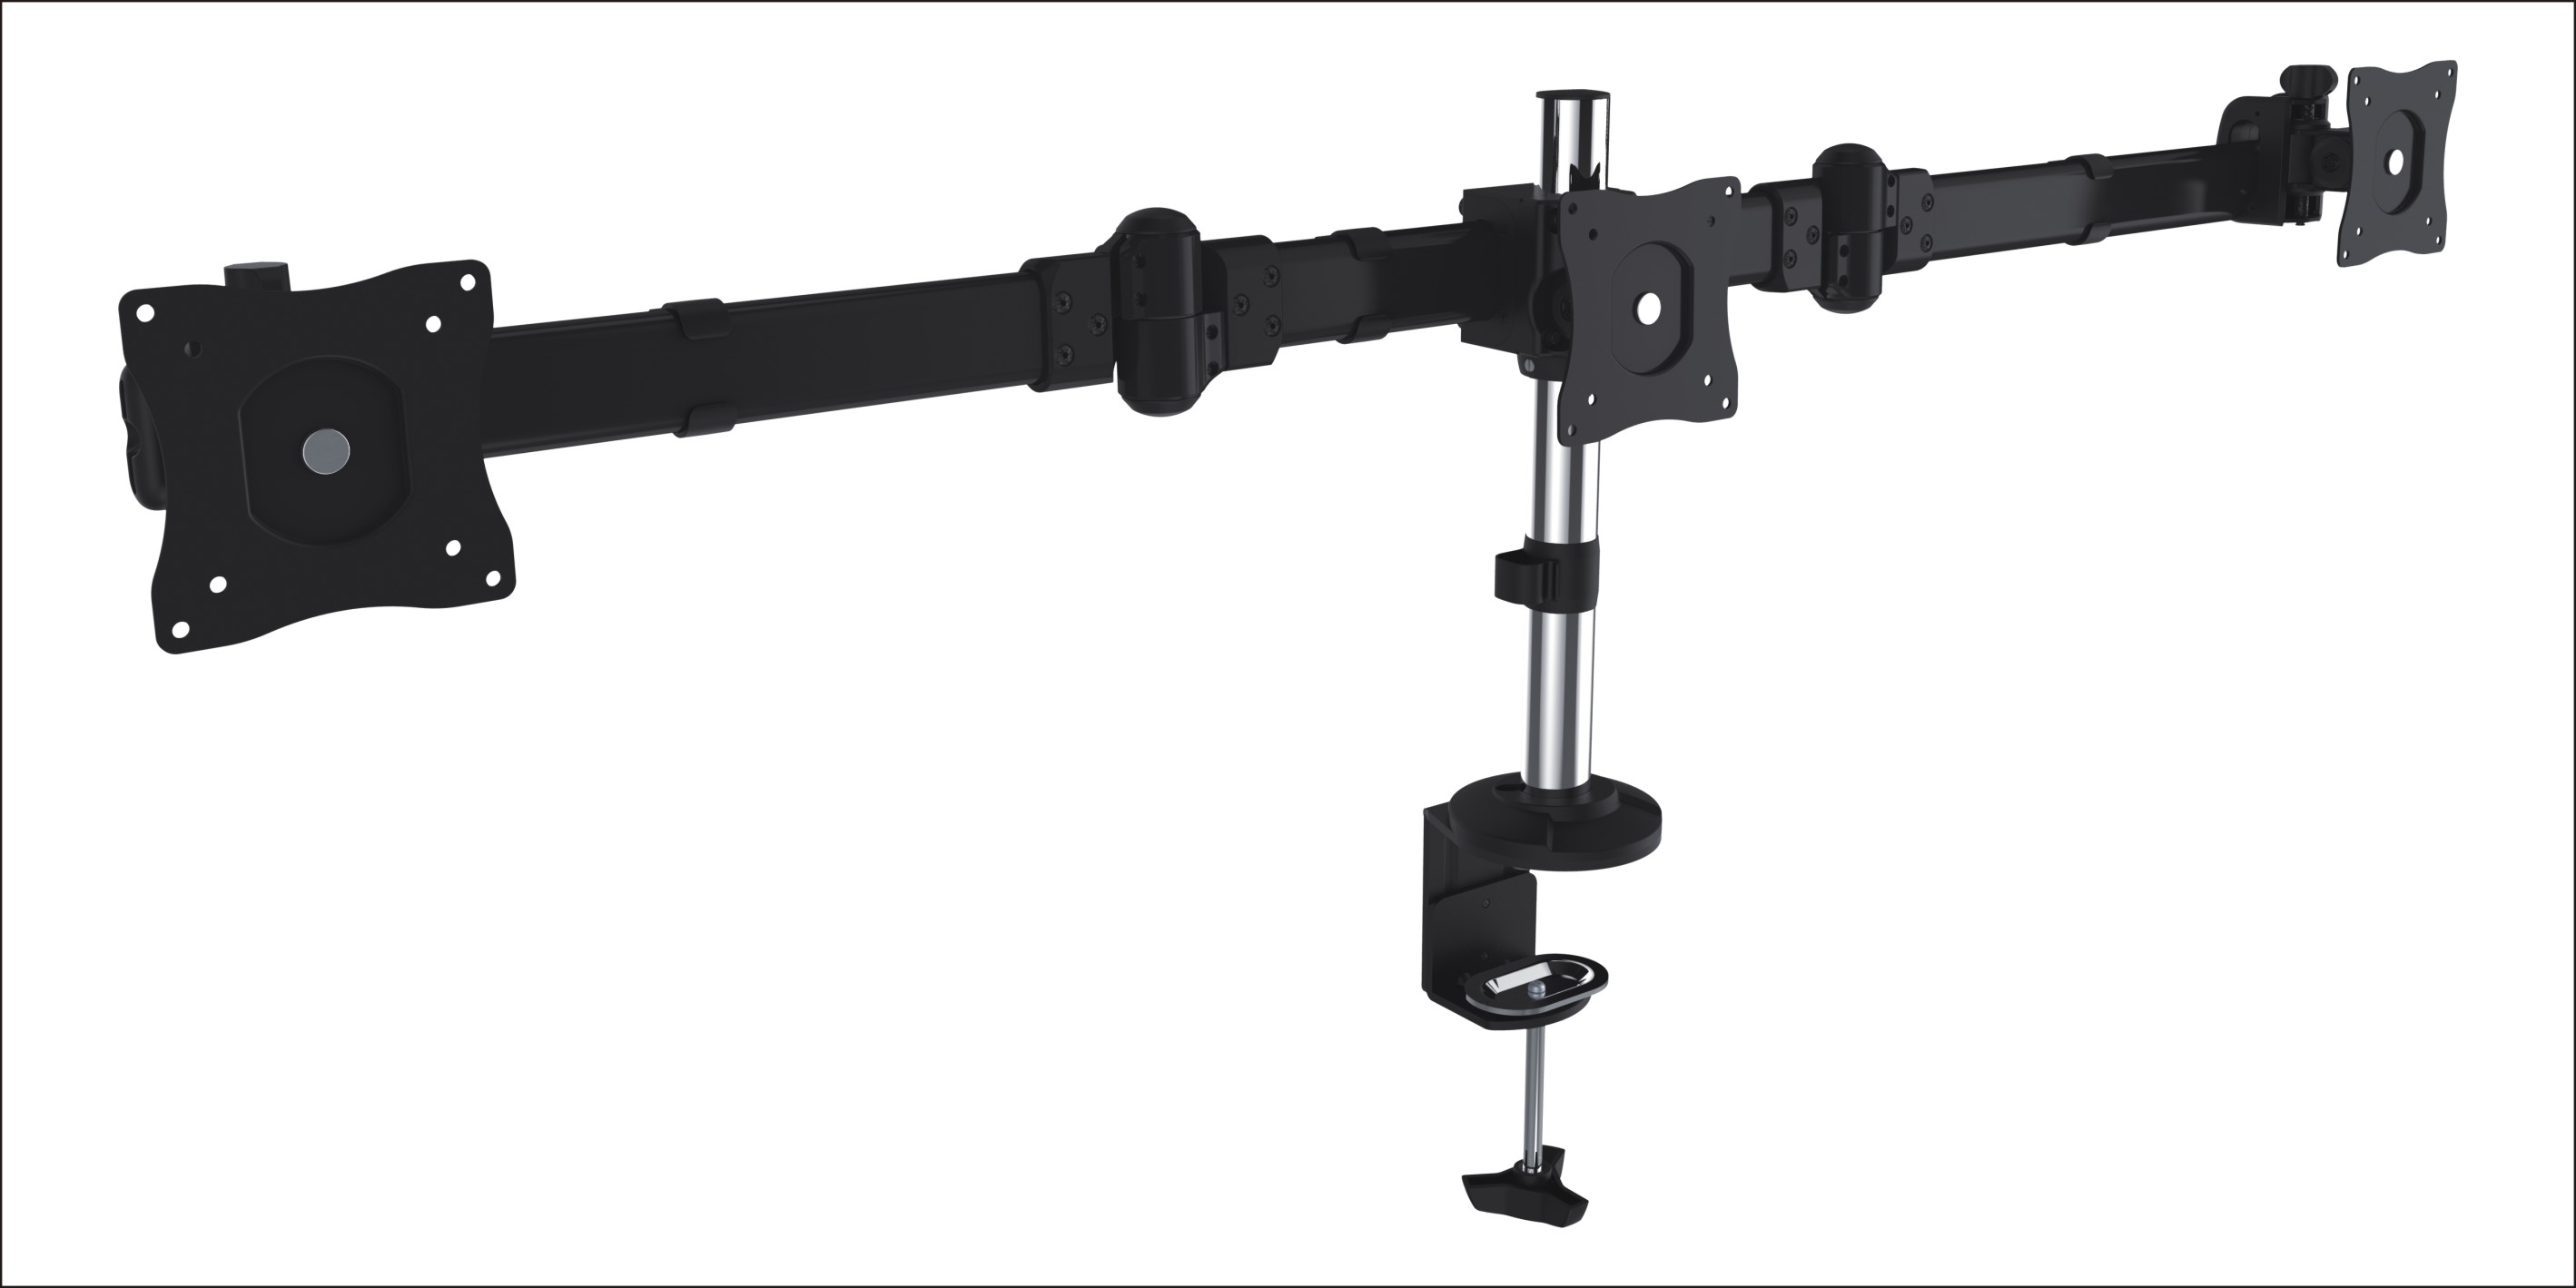 Brateck Triple Monitor Arm Mounts with Desk Clamp VESA 75/100mm Up to 27' Monitors Up to 8kg per screen